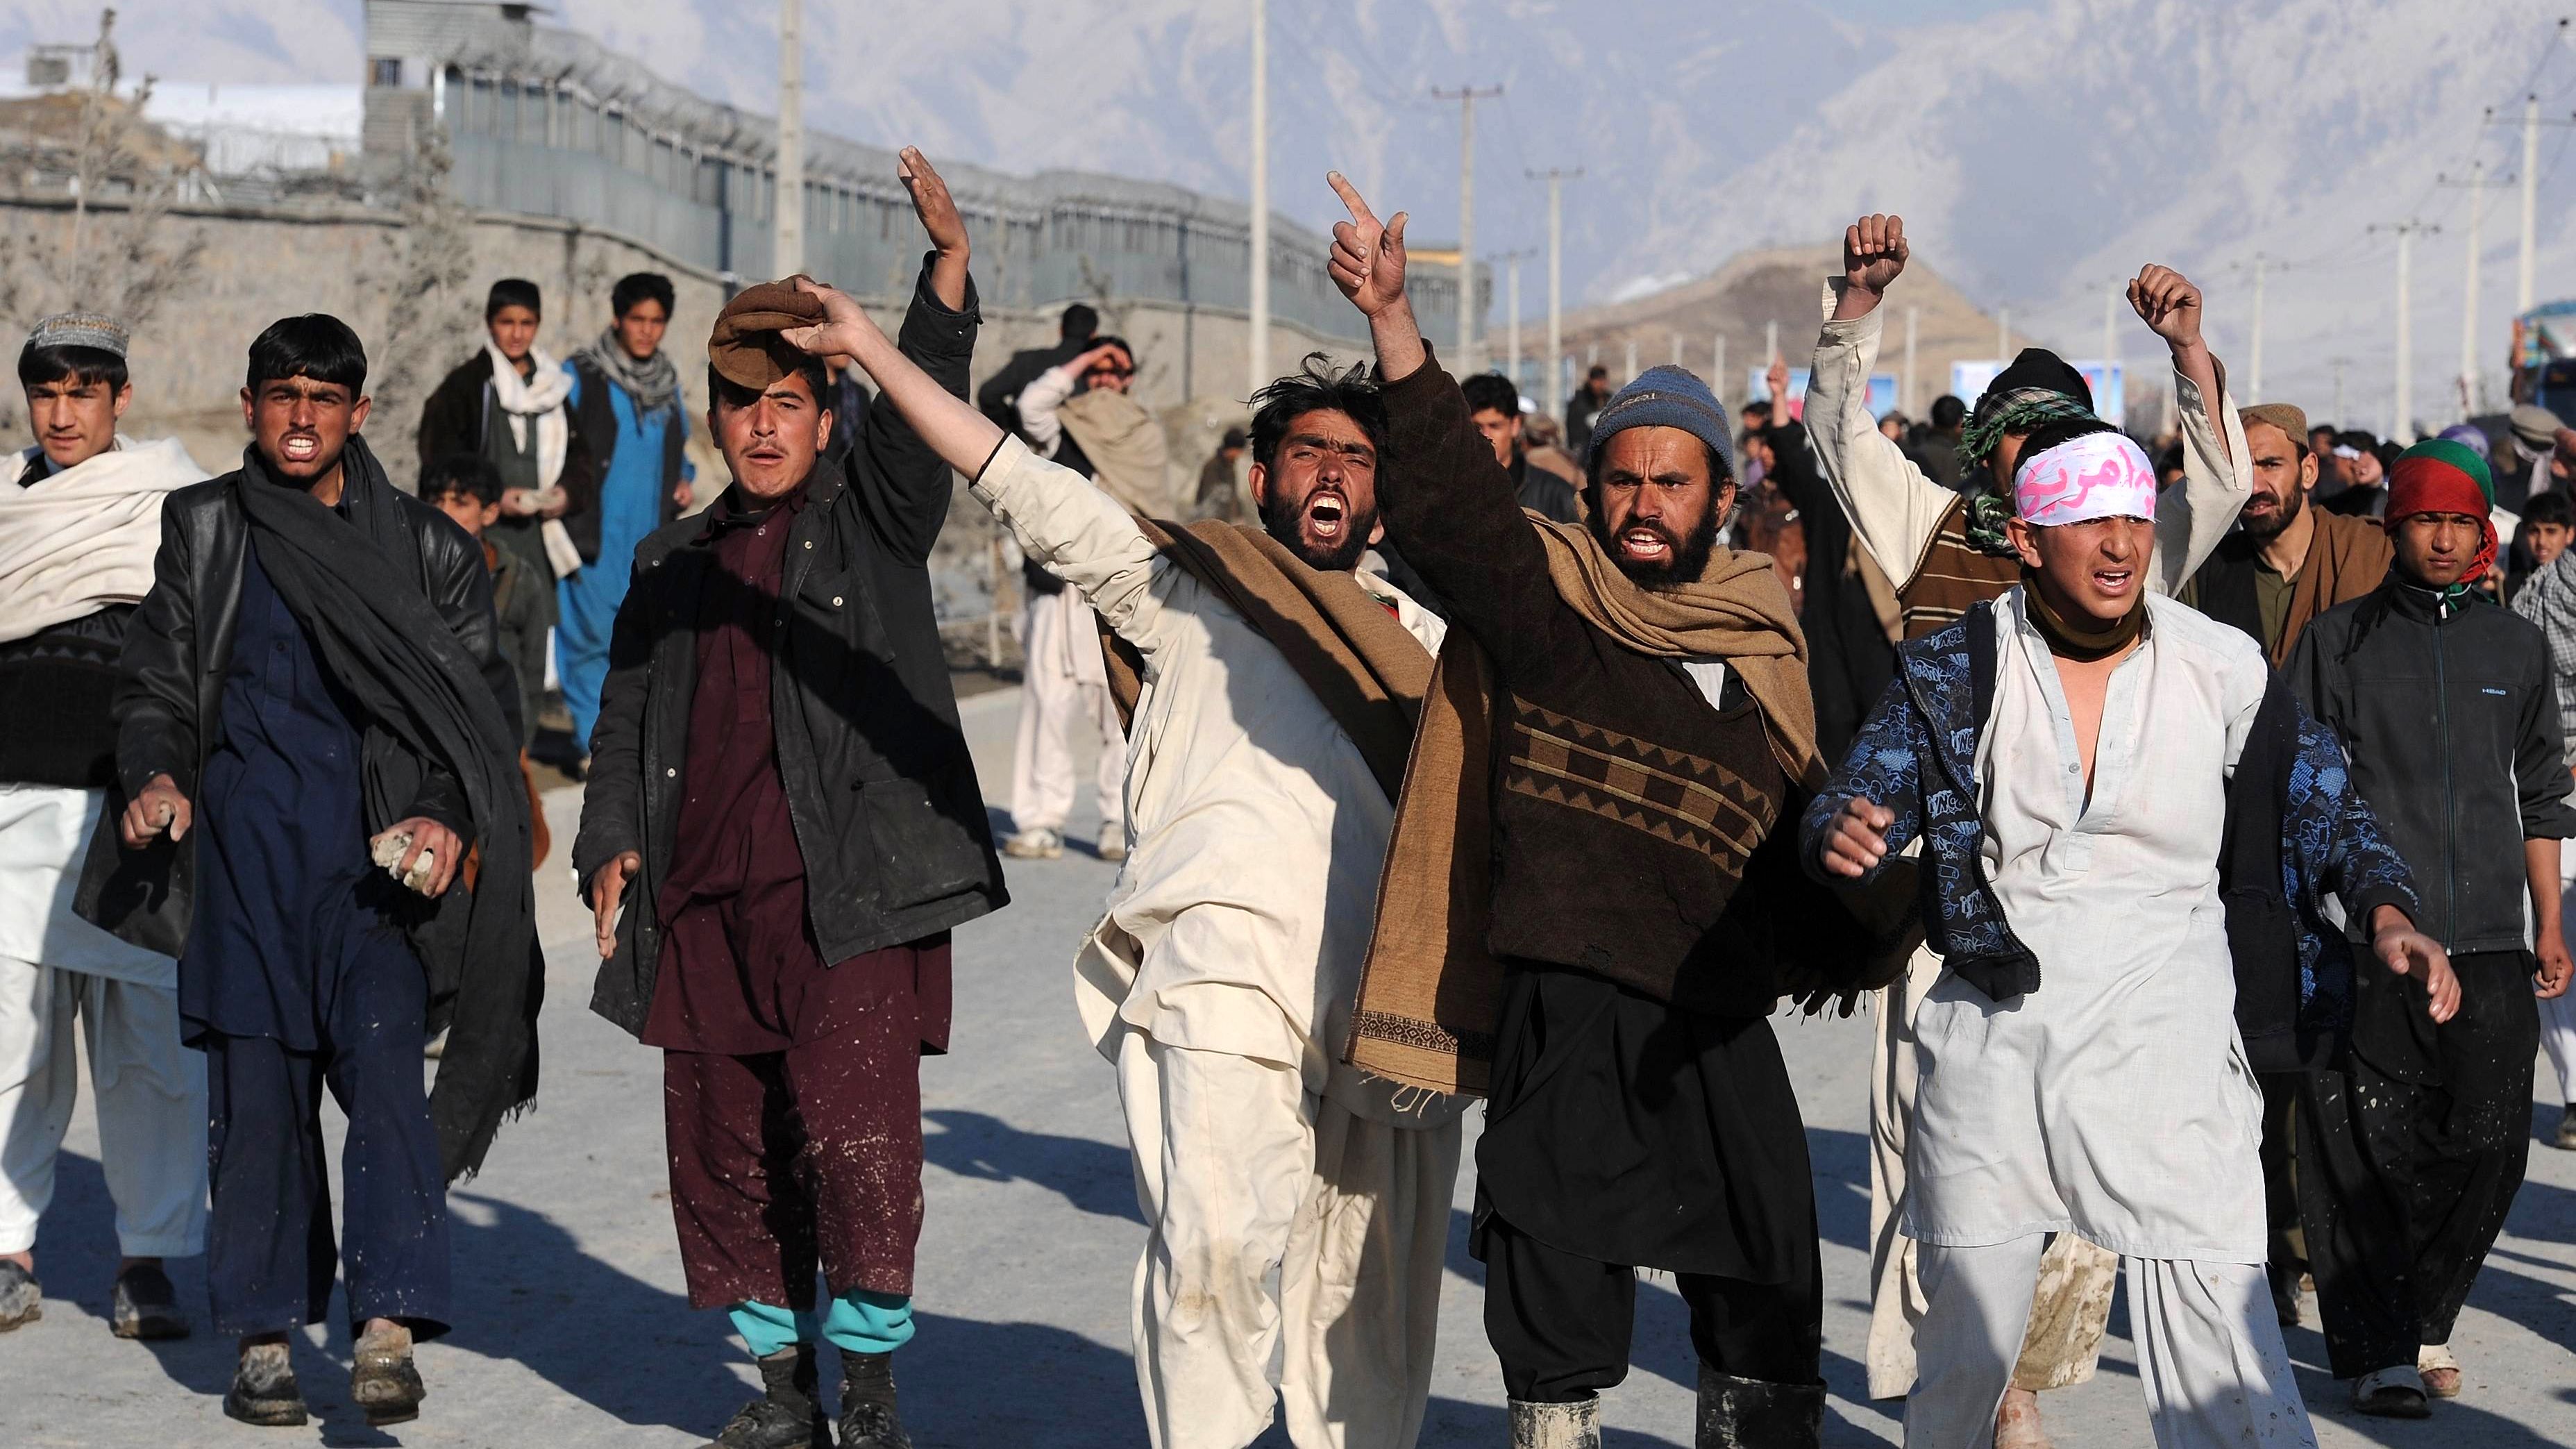 Afghan demonstrators shout during a protest against Quran desecration in Kabul on February 24, 2012.